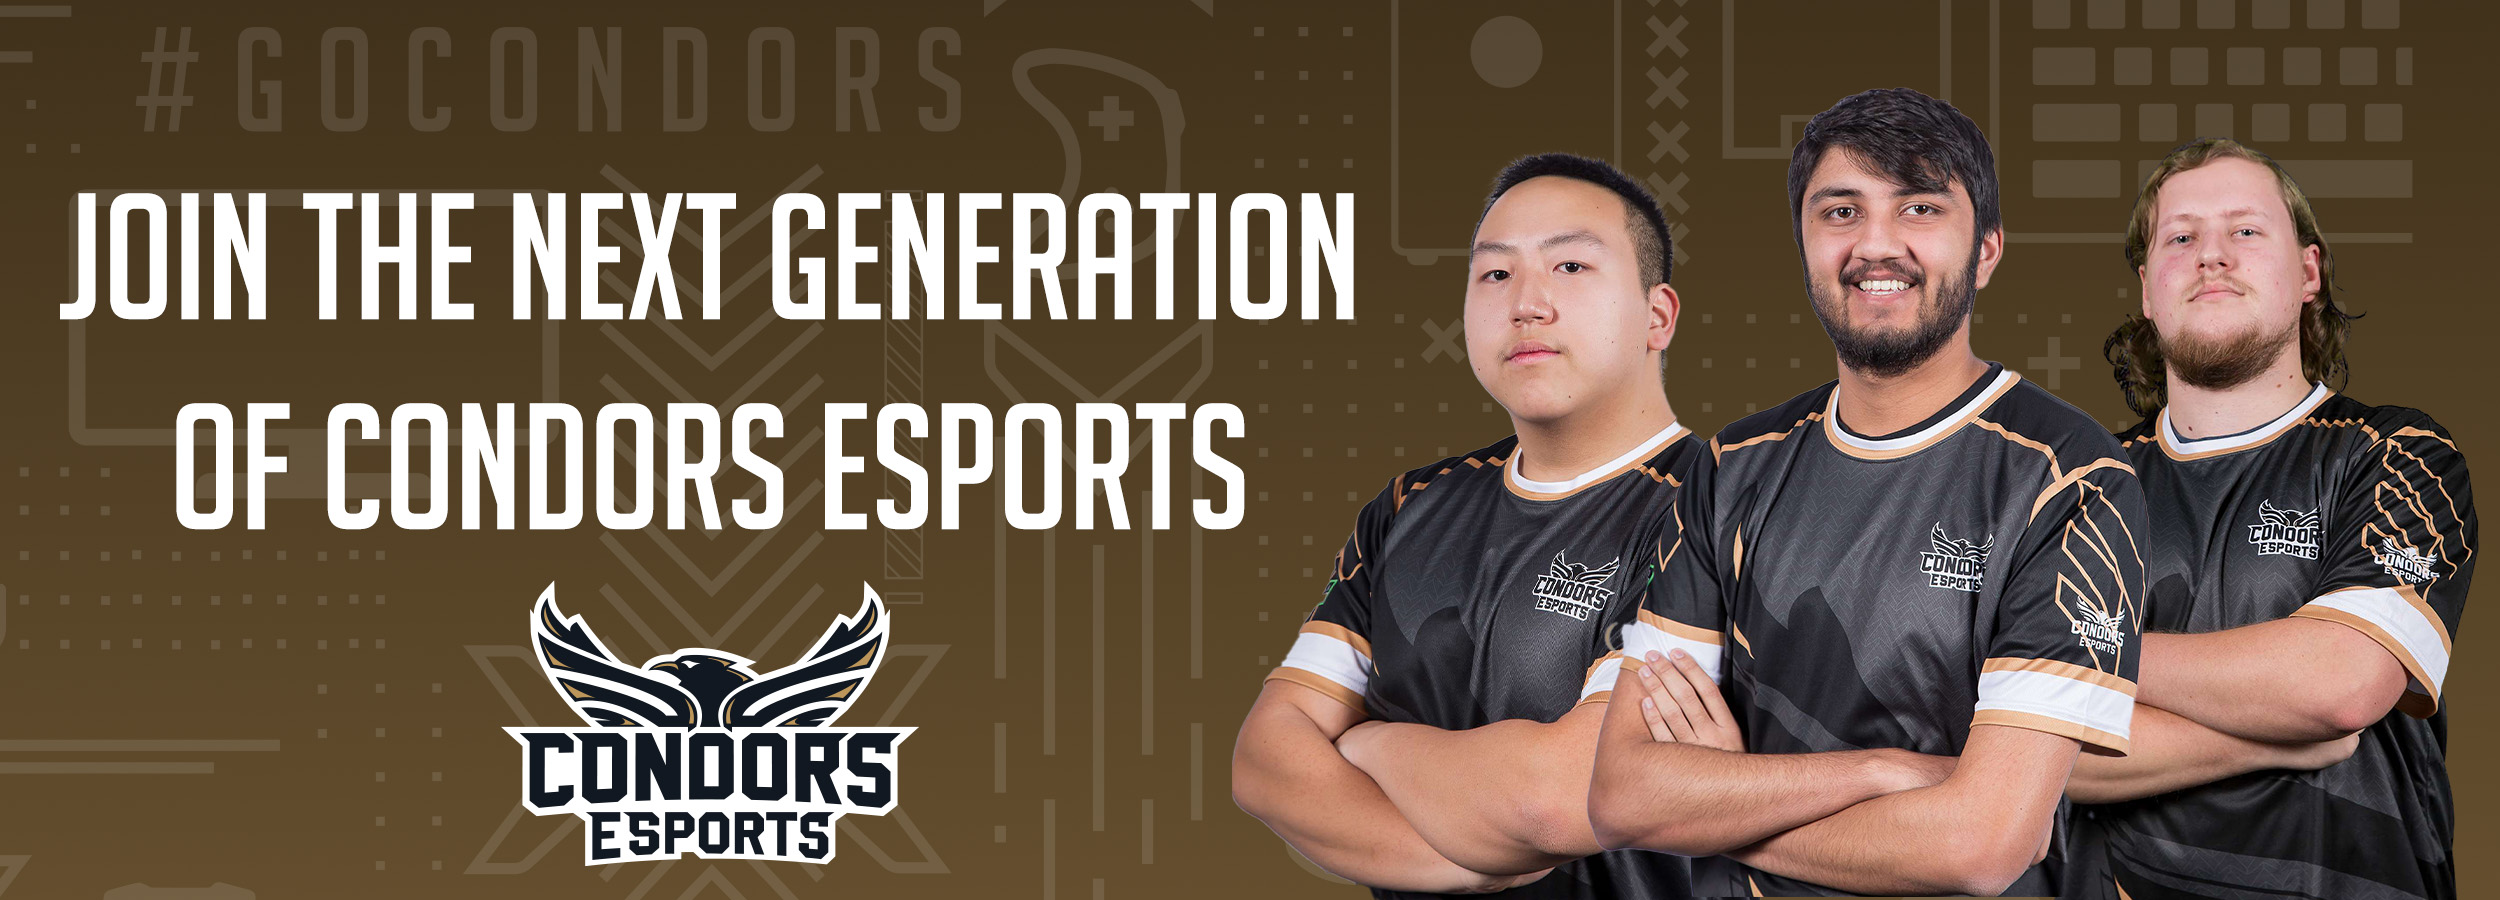 Join the Next Generation of Condors Esports